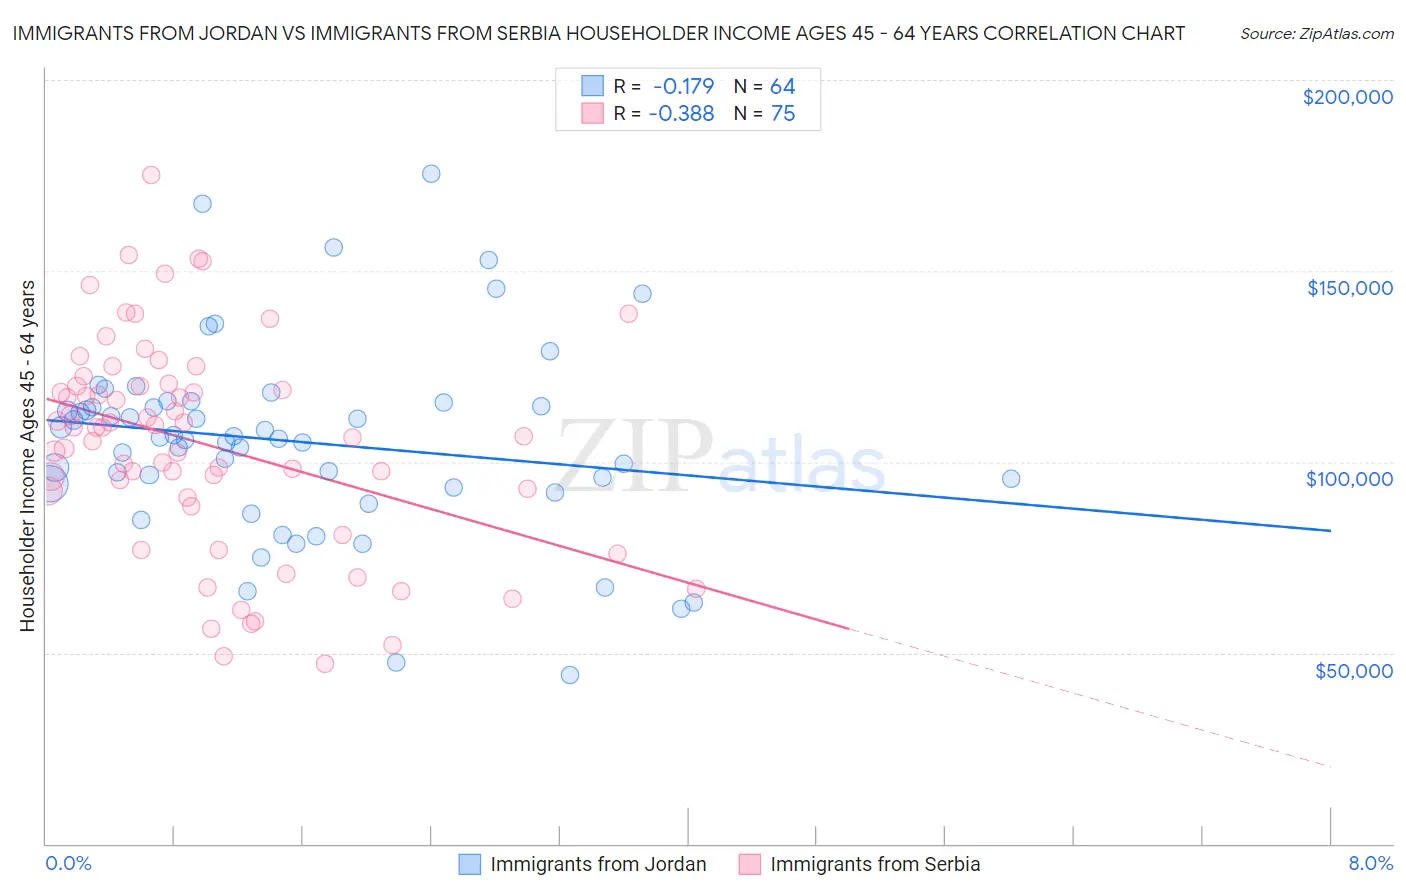 Immigrants from Jordan vs Immigrants from Serbia Householder Income Ages 45 - 64 years